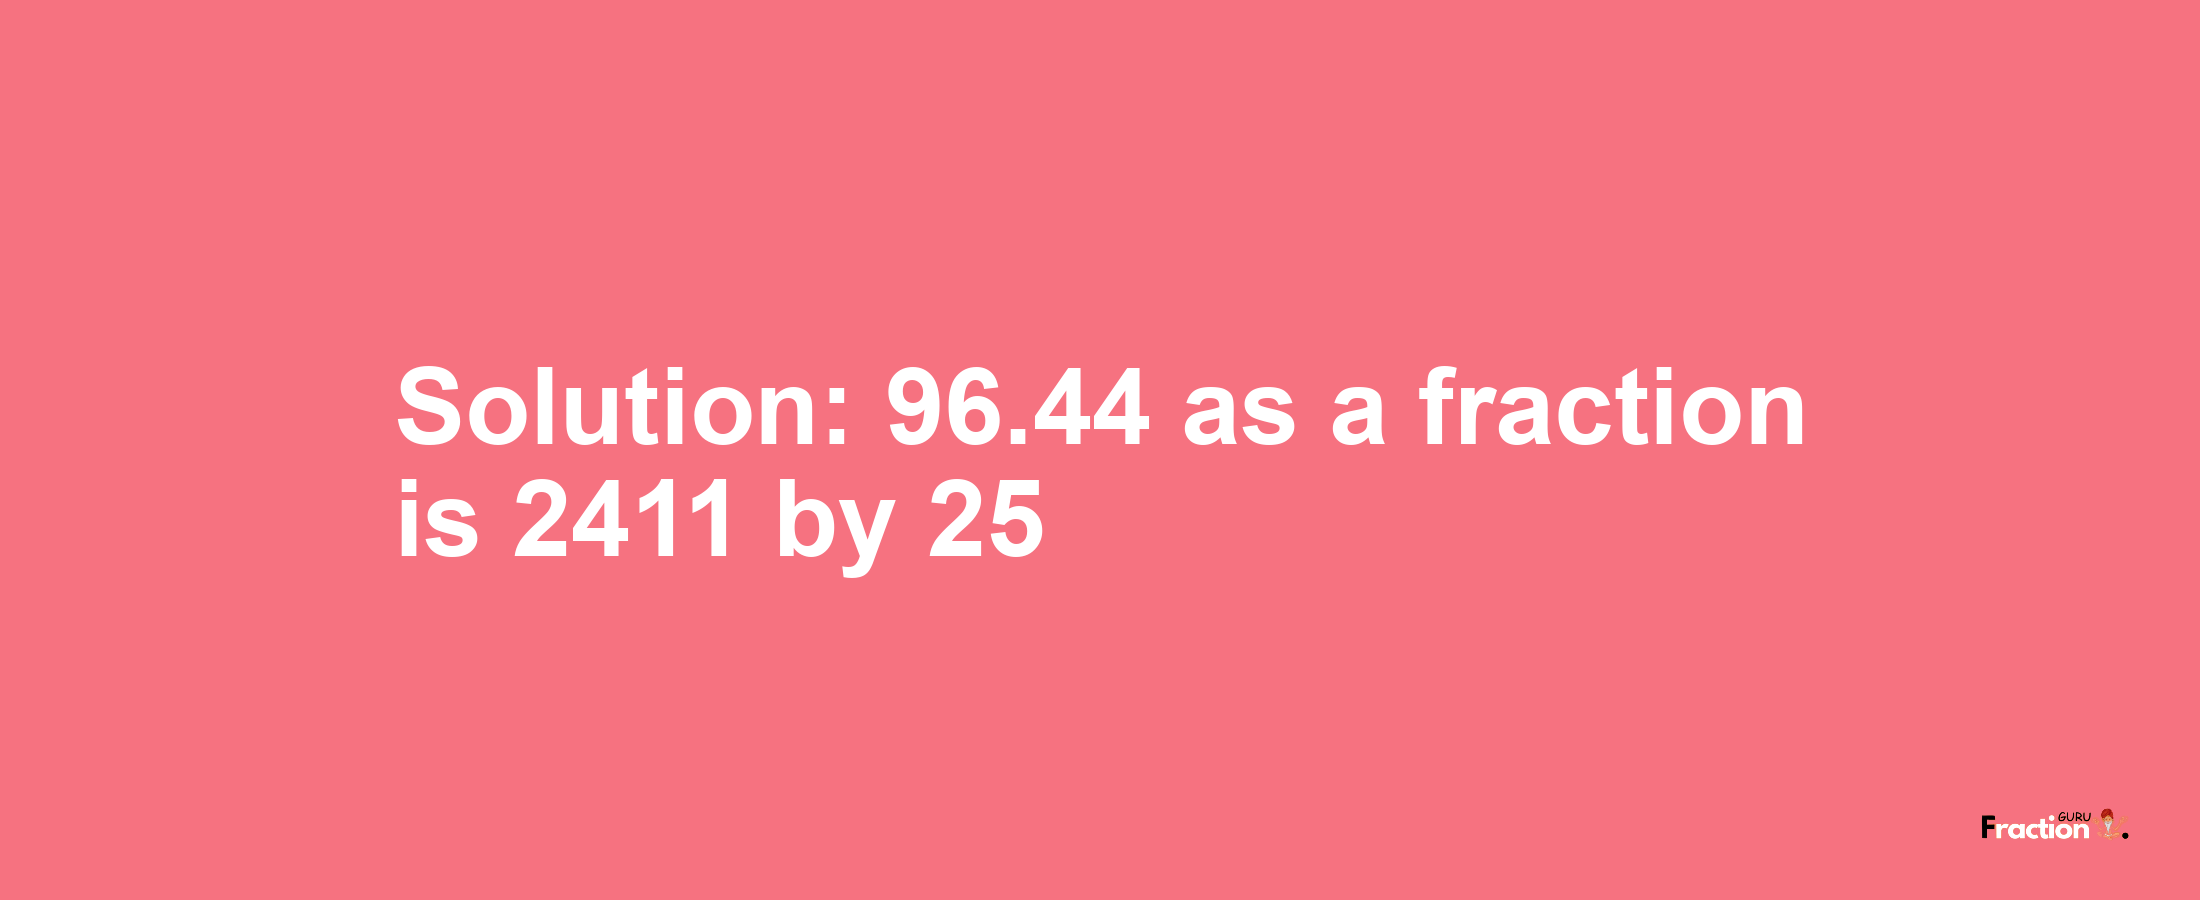 Solution:96.44 as a fraction is 2411/25